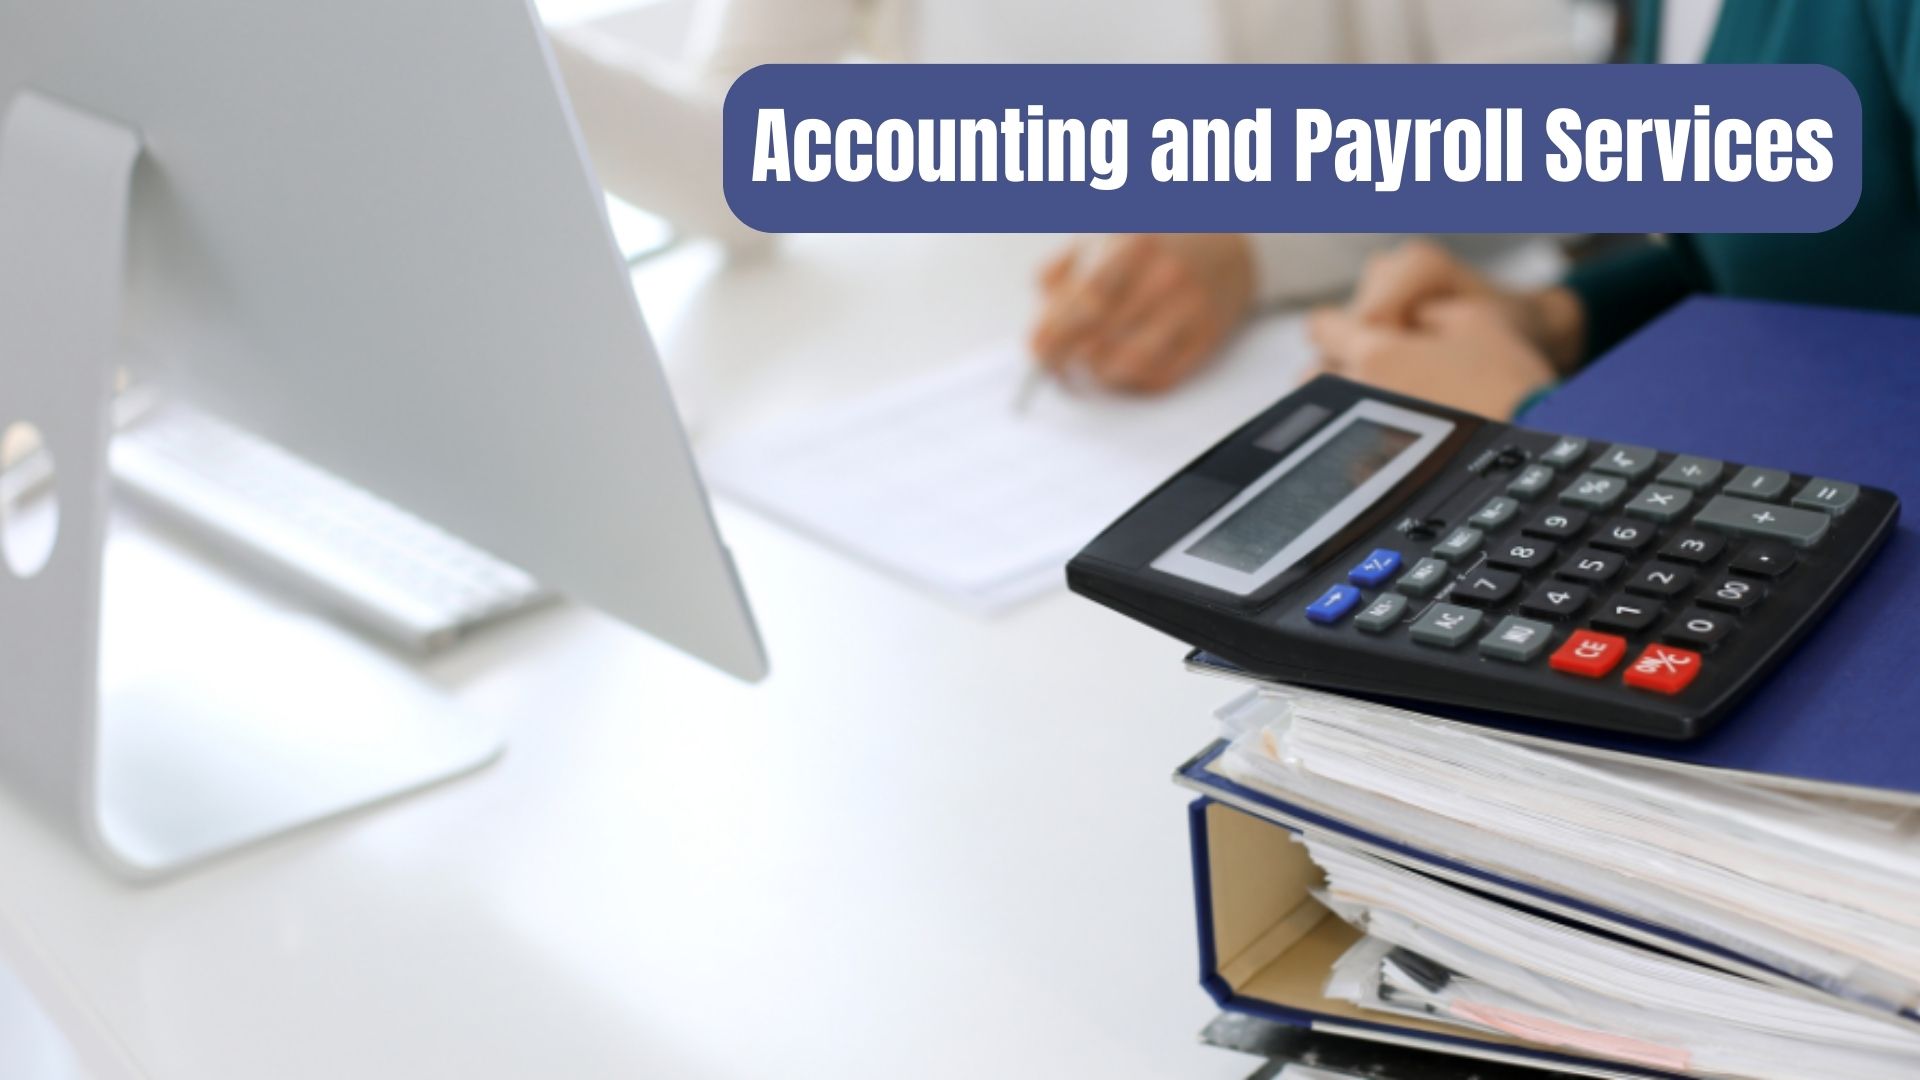 Accounting and Payroll Services